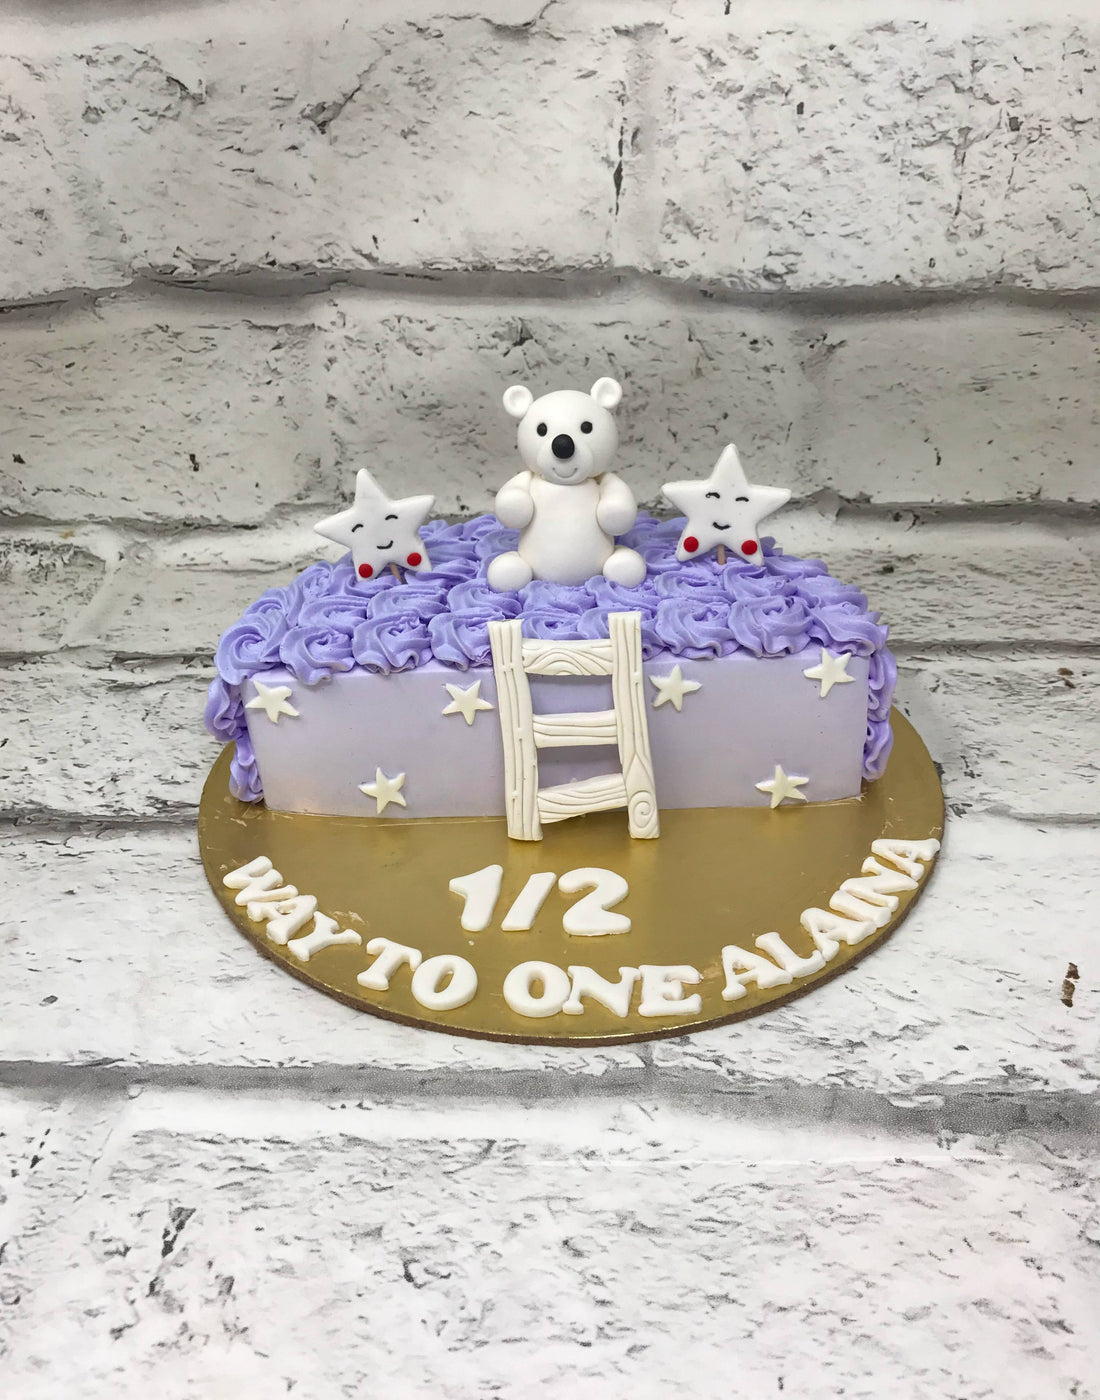 6 Months theme cake in Cream by Creme Castle